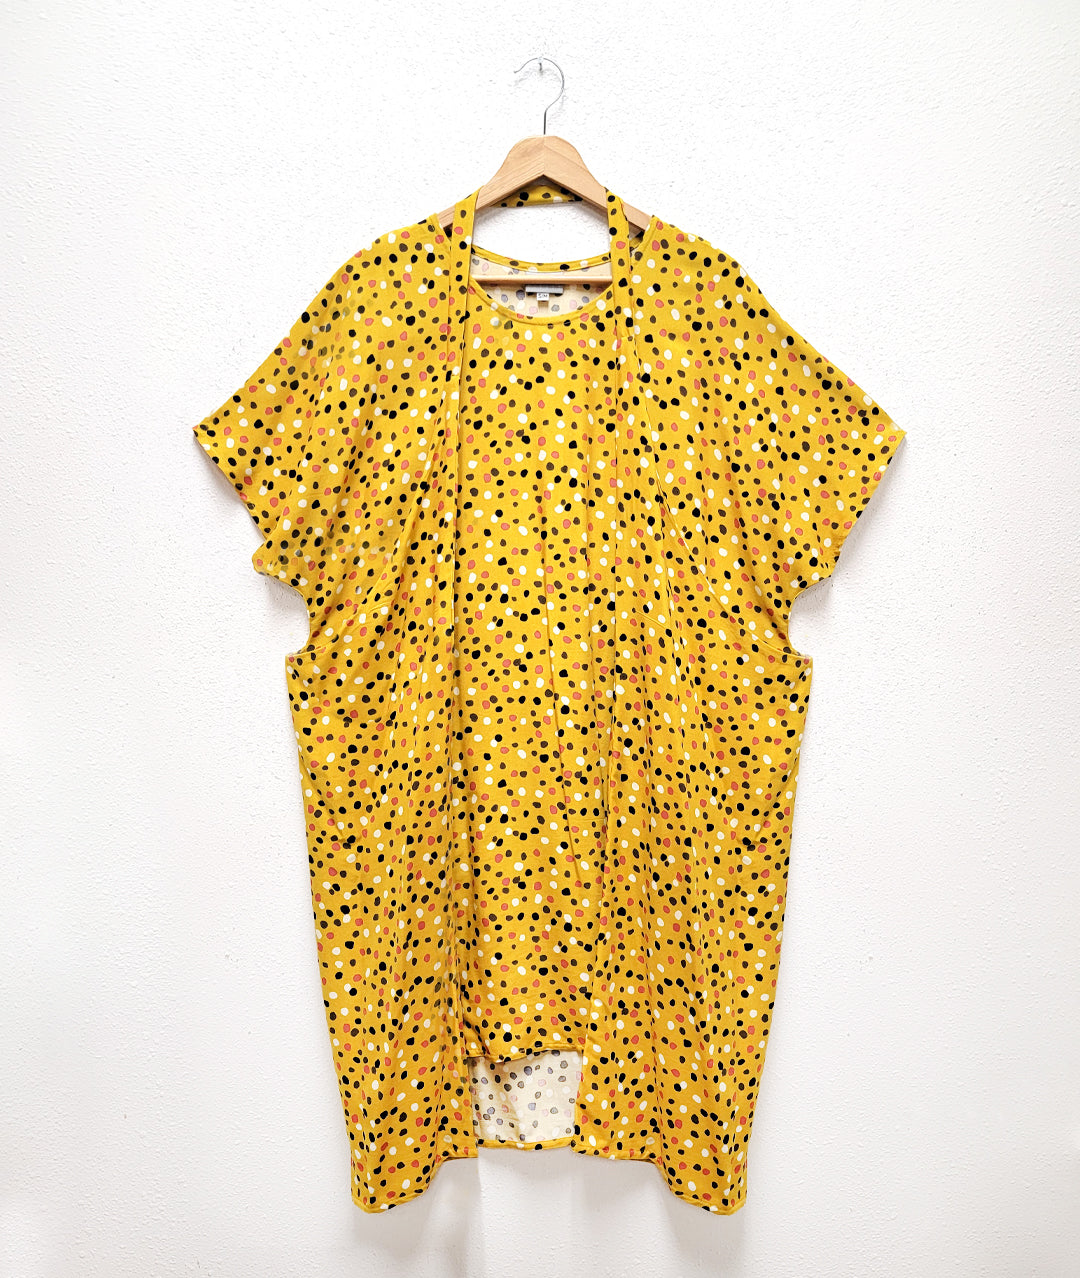 mustard yellow dress with a multicolor dot print. dress has extended hips connected by a band to be worn around the neck